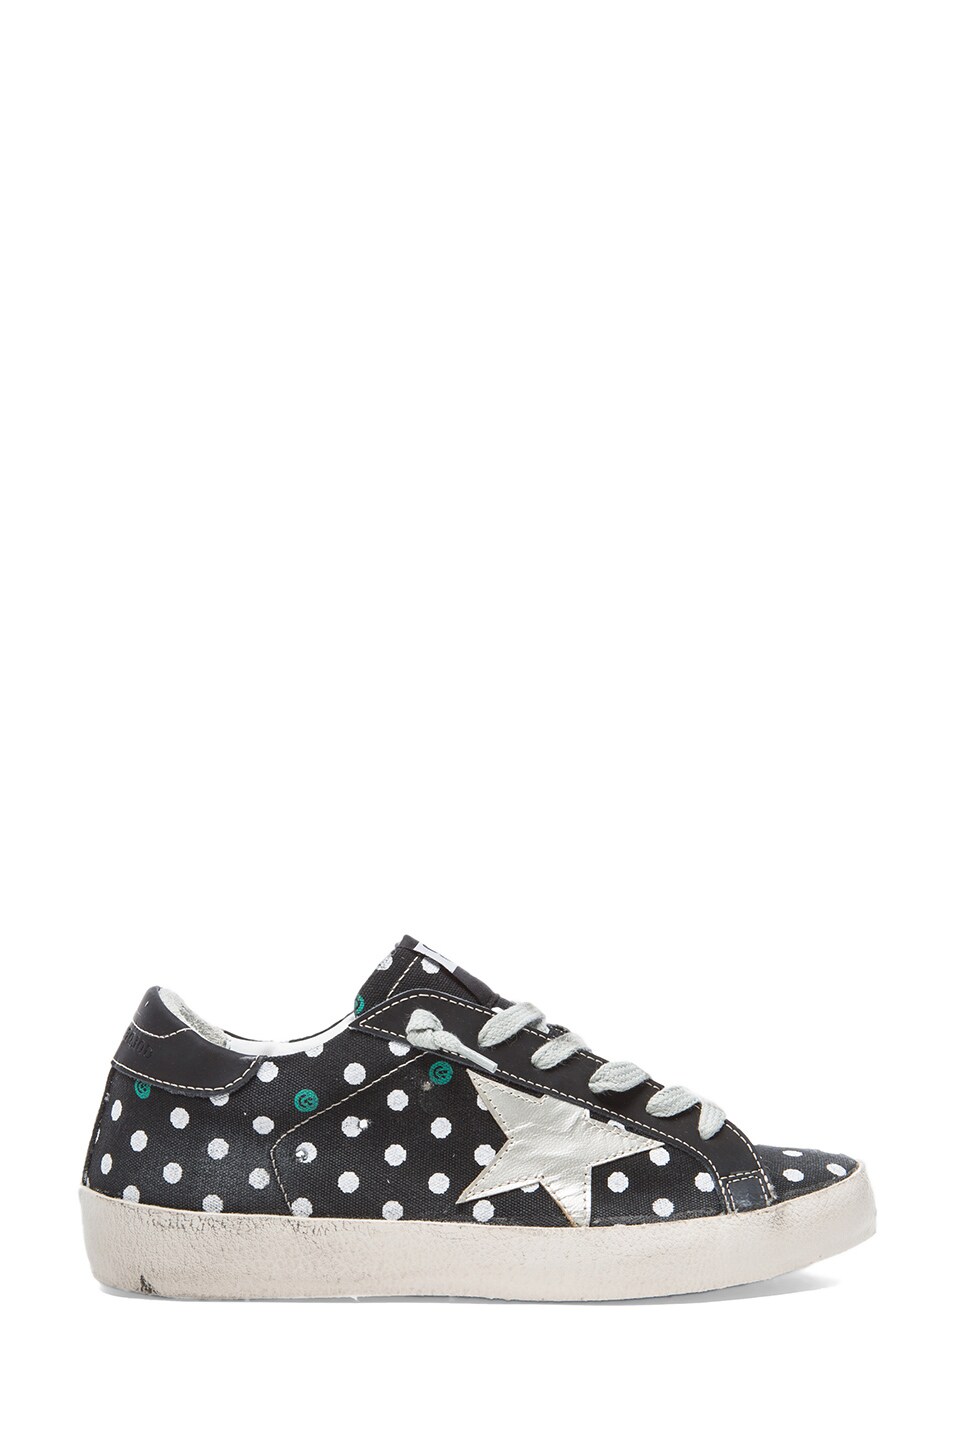 Image 1 of Golden Goose Super Star Polka Dot Canvas Low Top Sneakers in Black & White